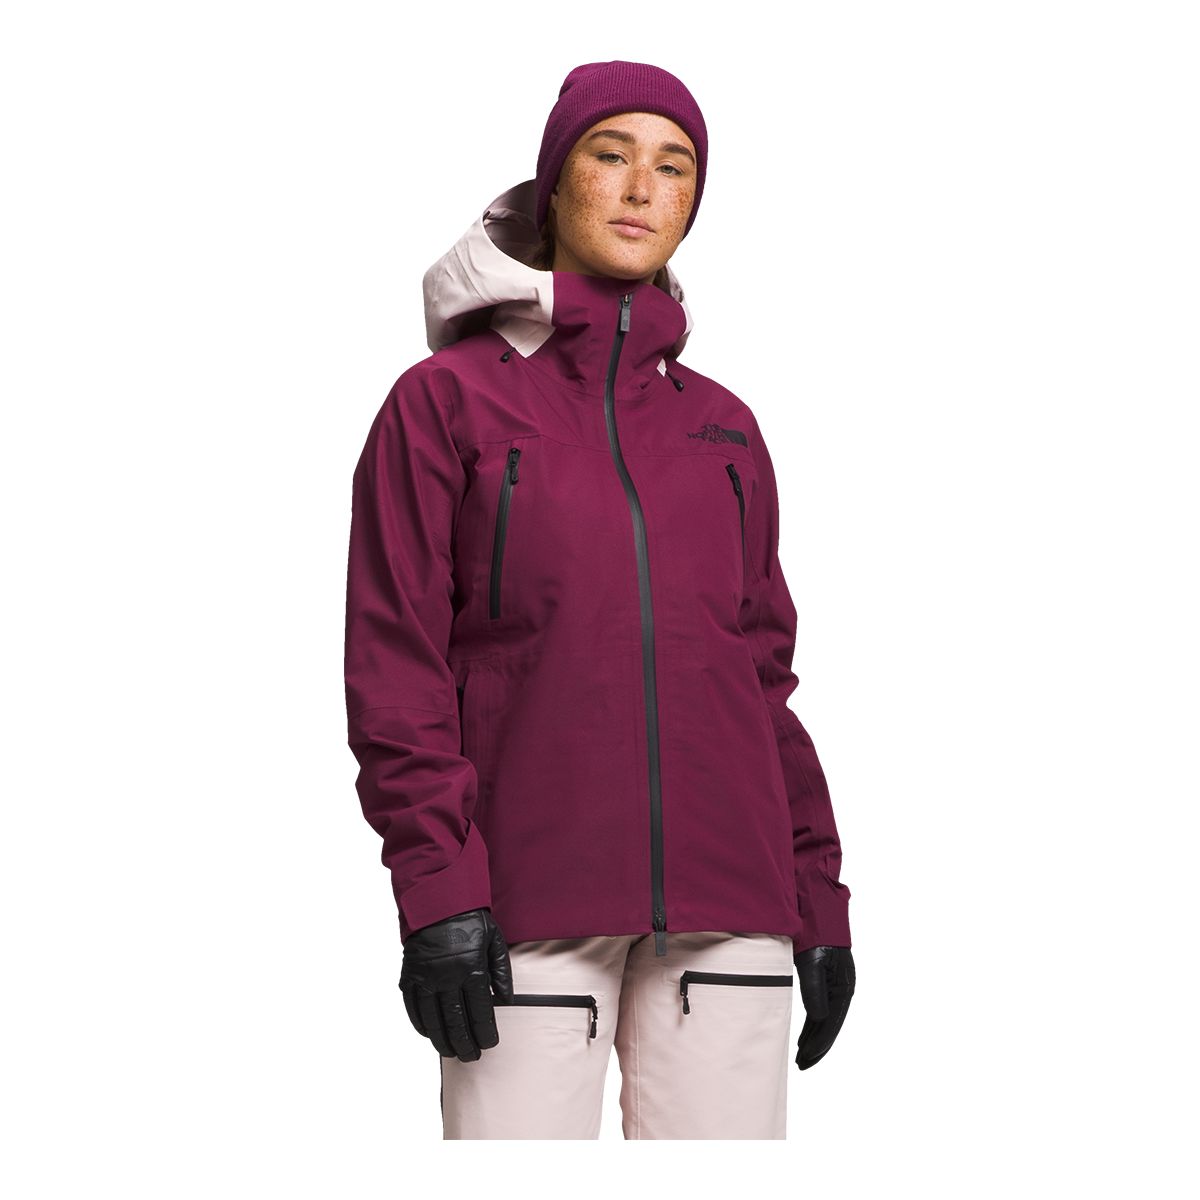 Image of The North Face Women's Ceptor Jacket